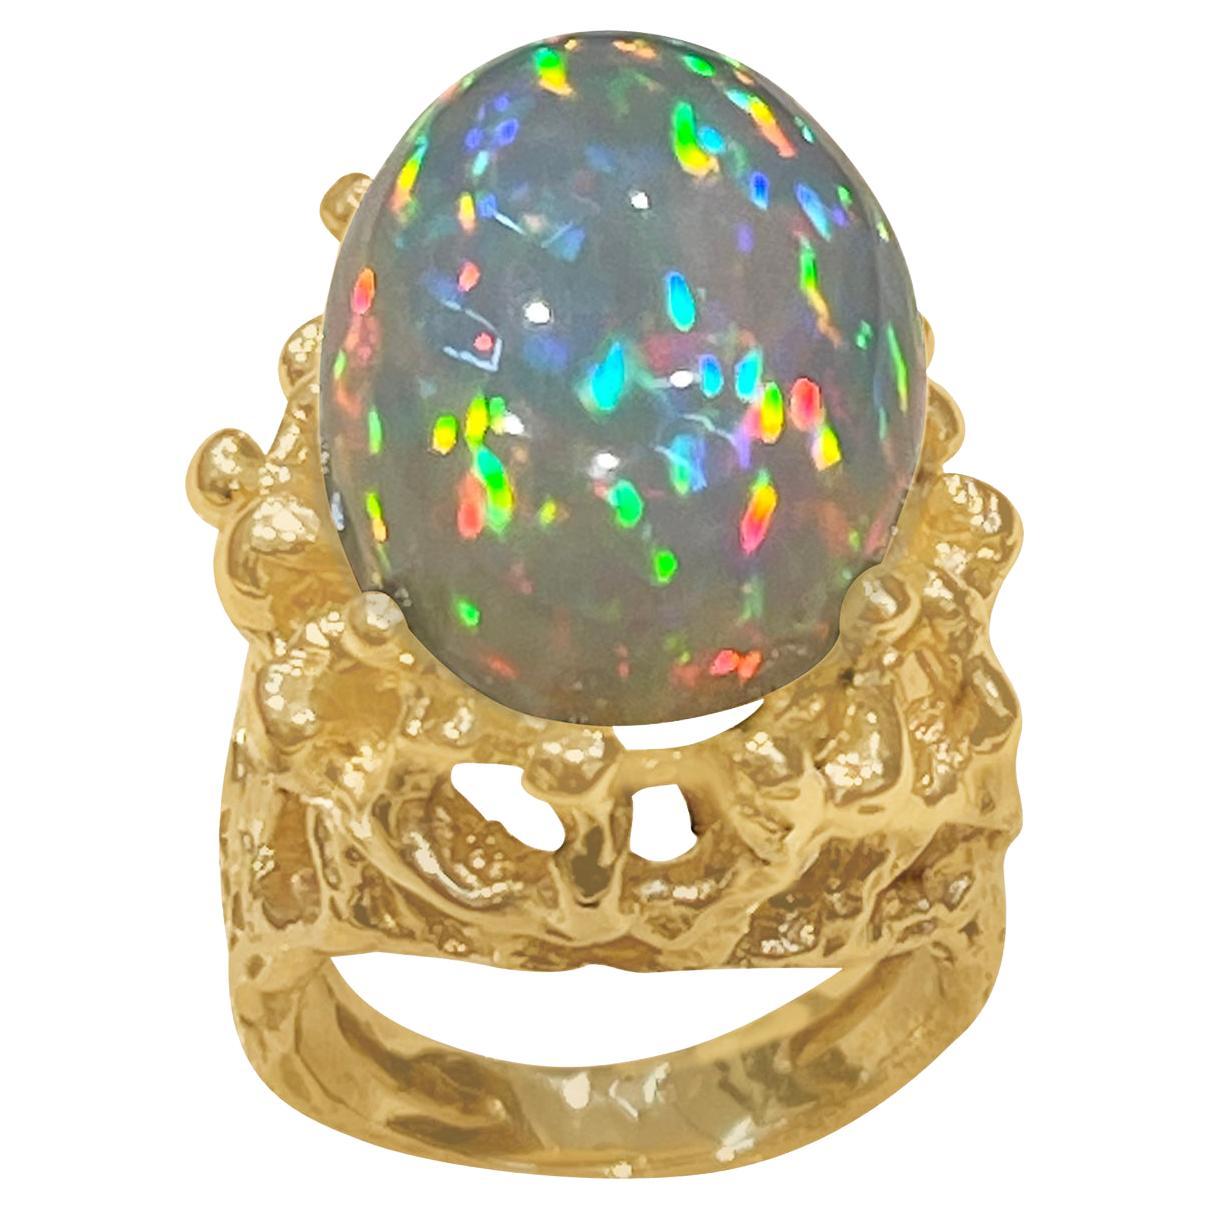 17 Carat Oval Shape Ethiopian Opal Cocktail Ring 14 Karat Yellow Gold Solid Ring For Sale